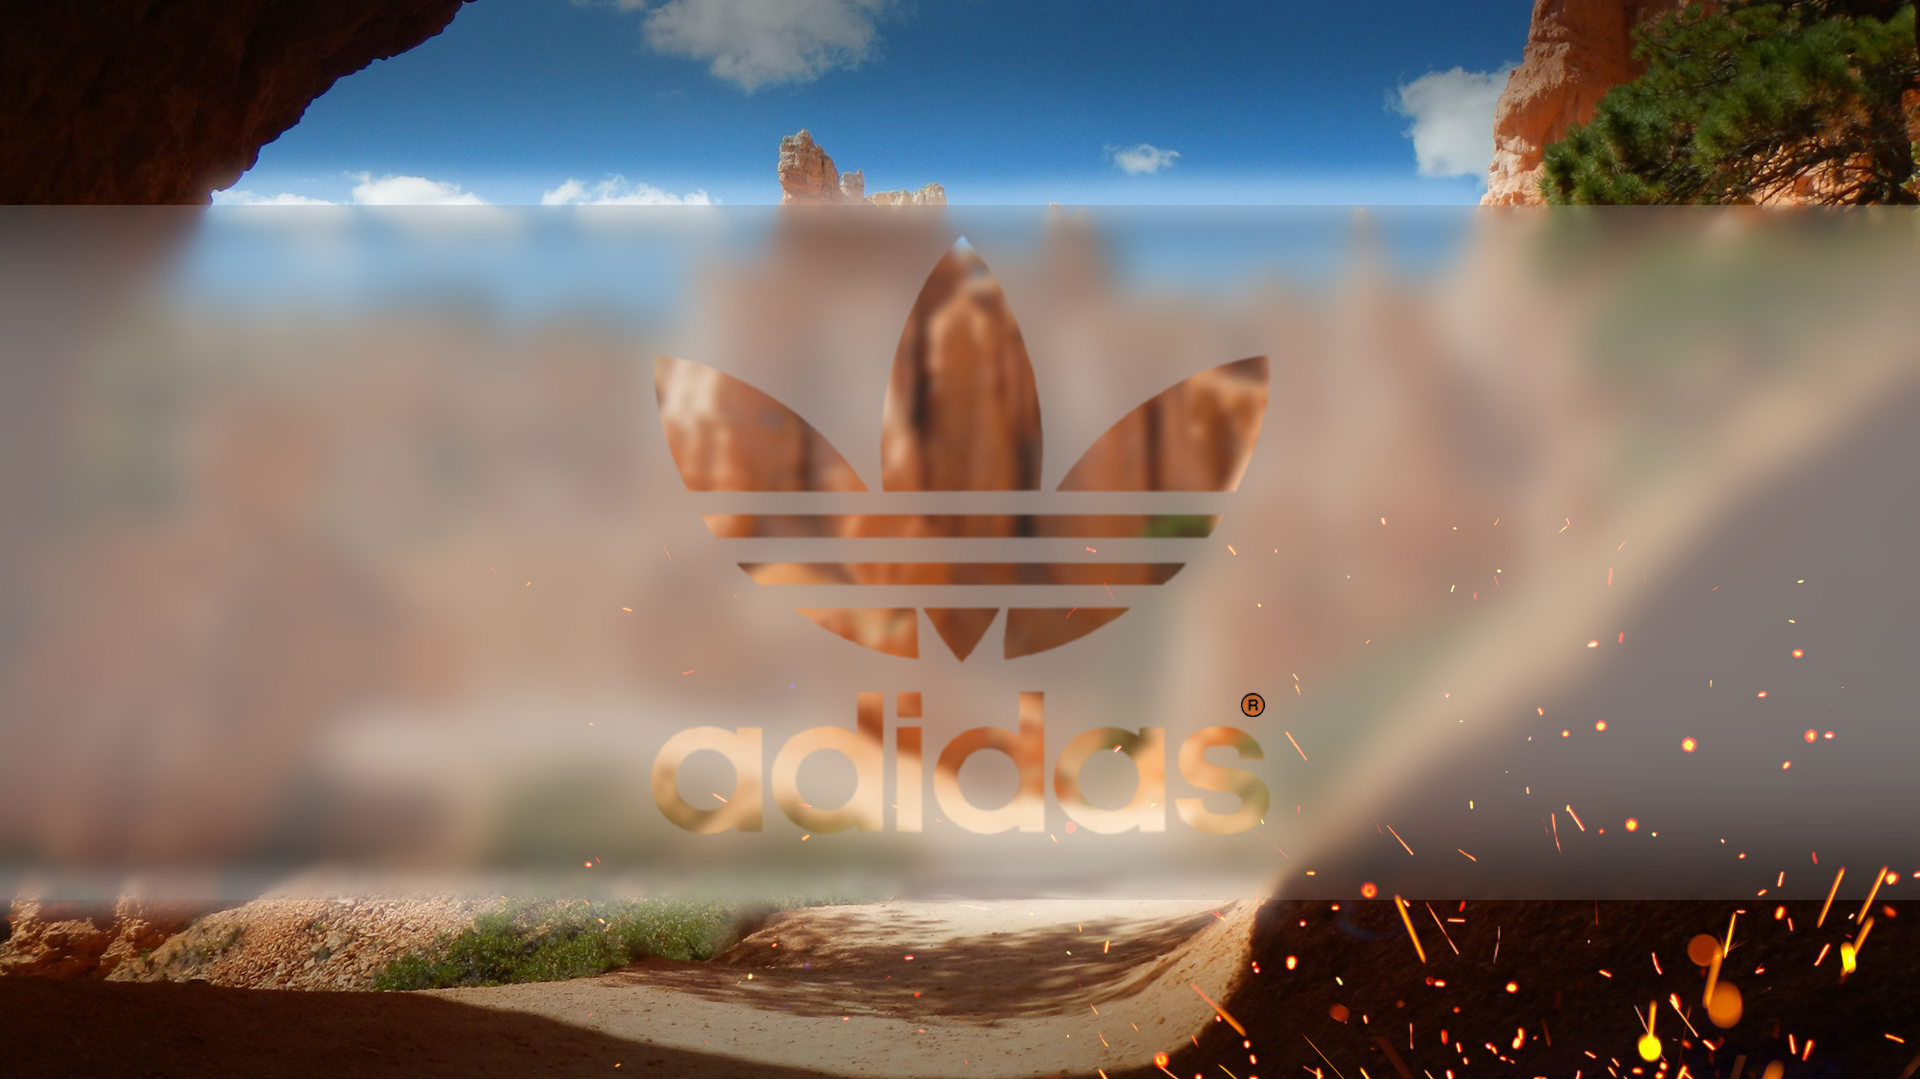 Adidas HD Wallpaper And Background